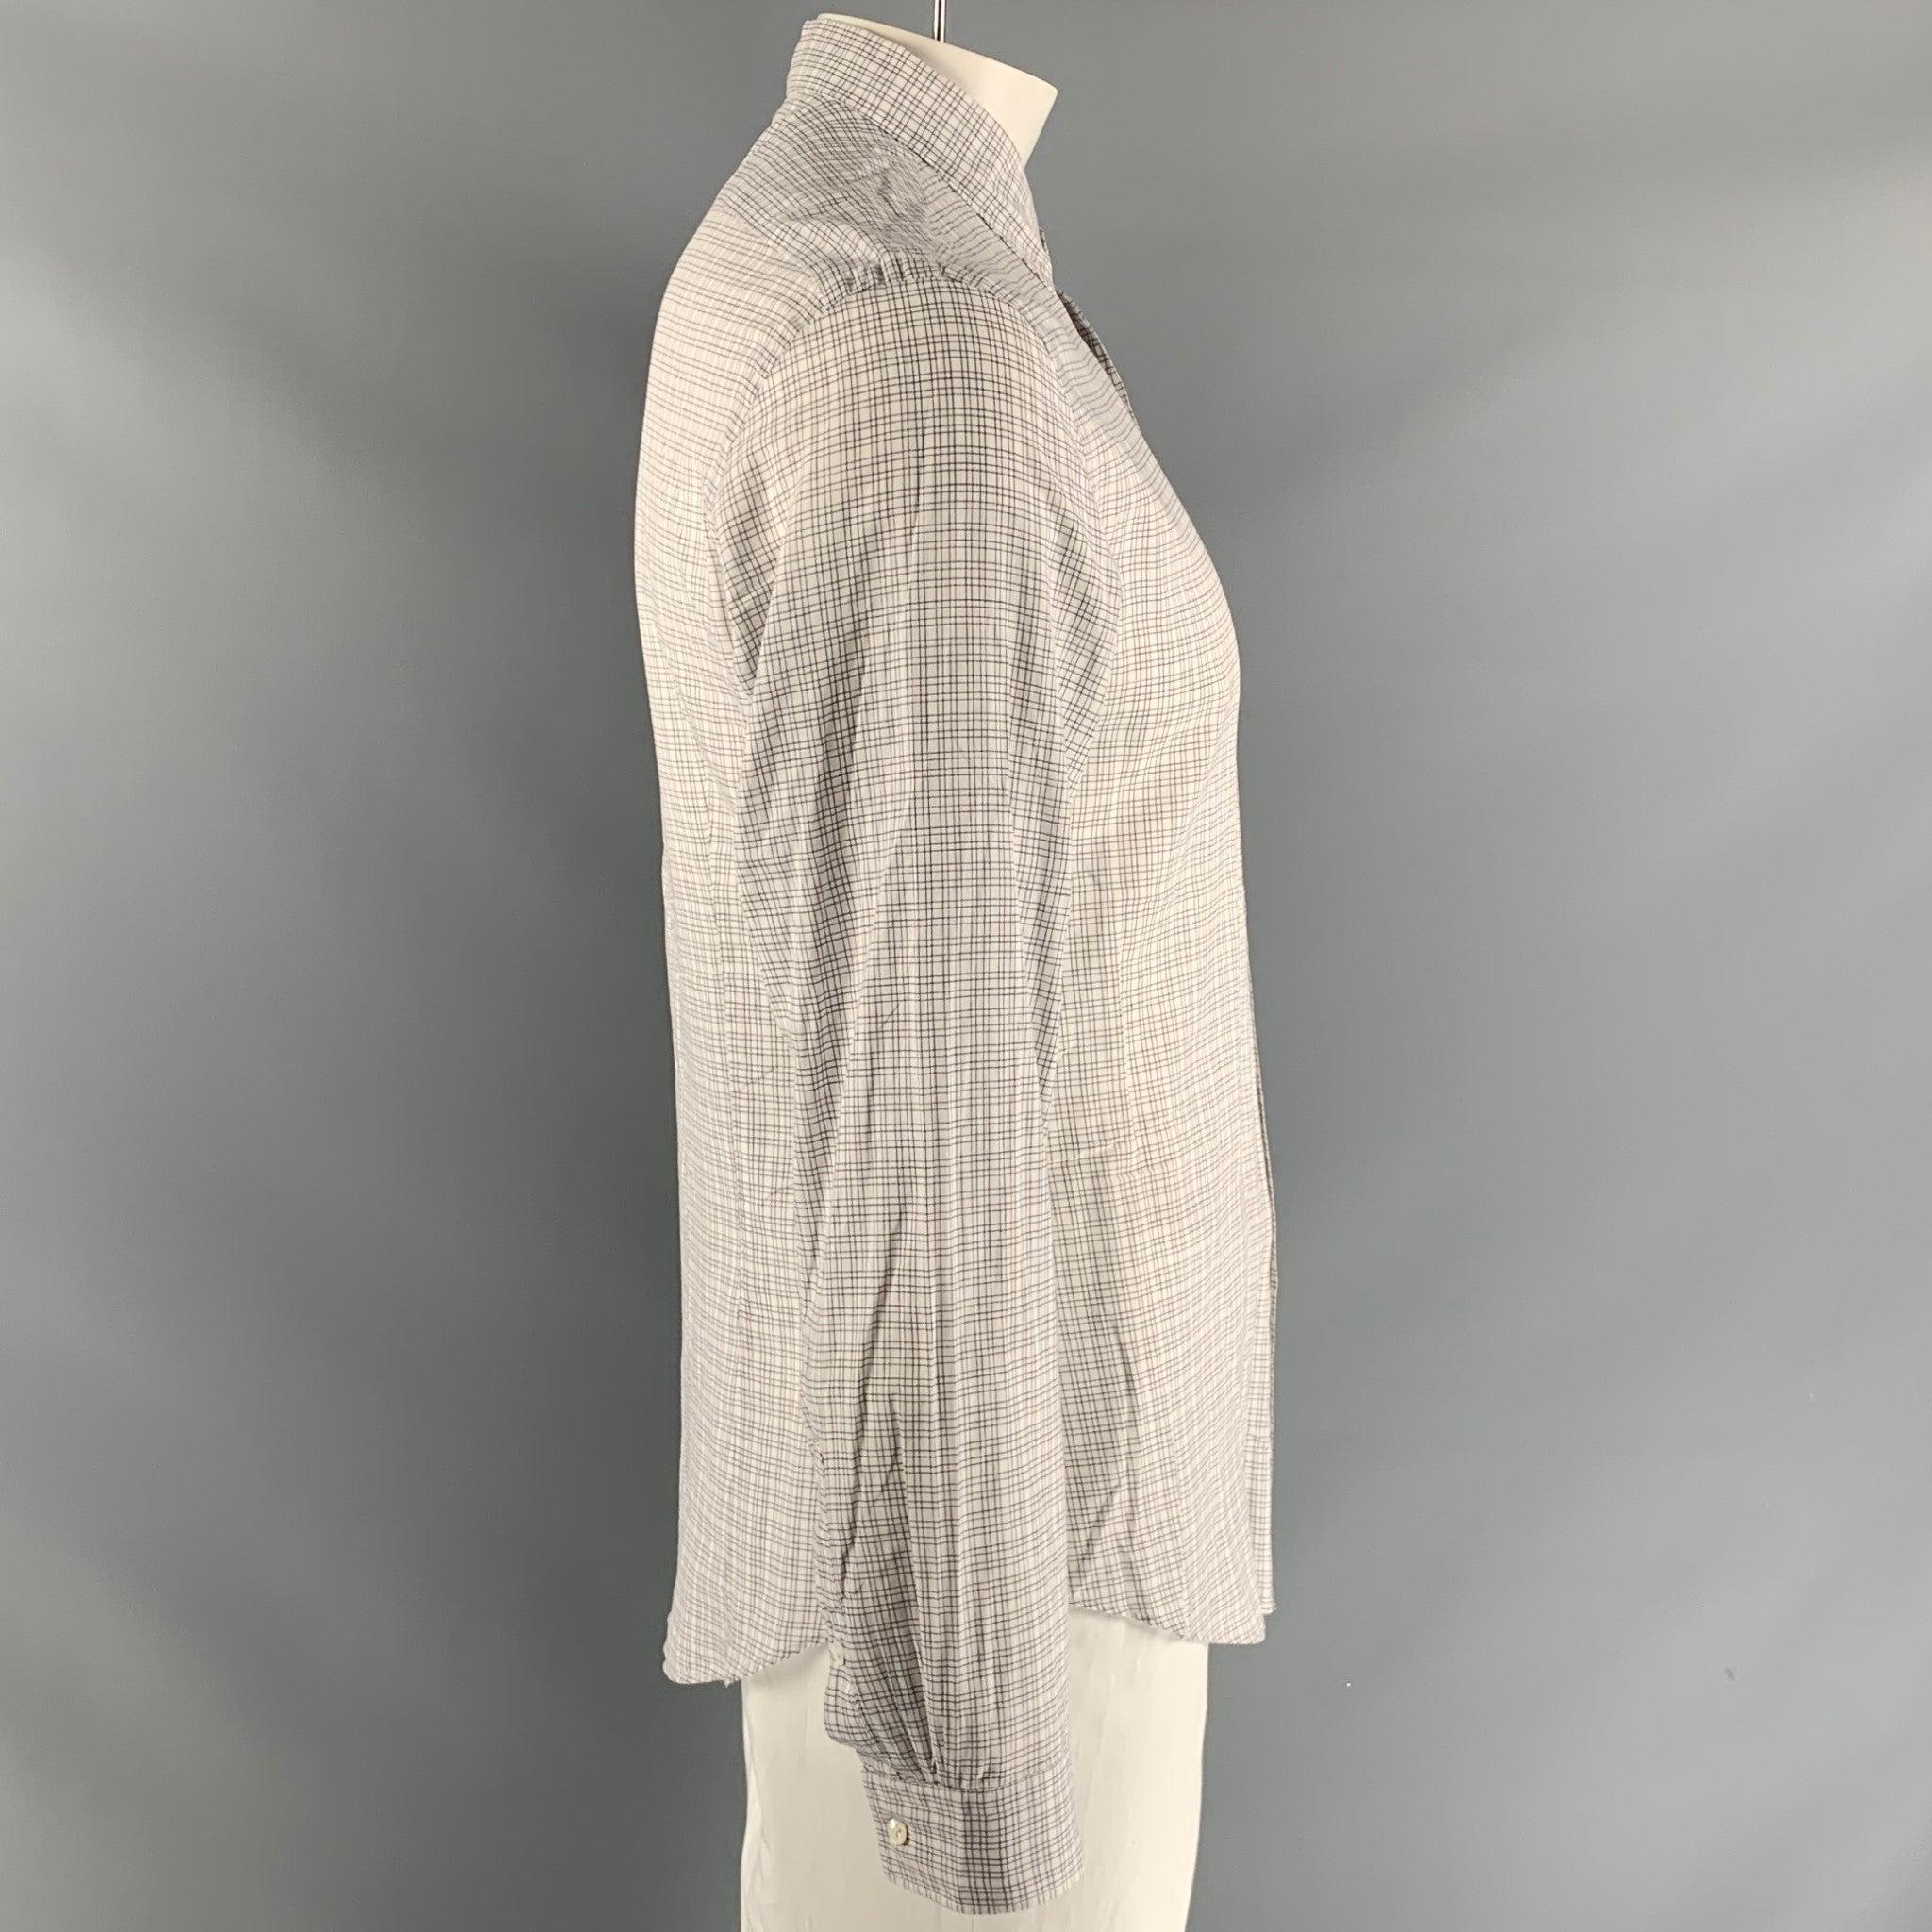 JOHN VARVATOS long sleeve shirt comes in white checkered cotton featuring a patch pocket at left front panel, straight collar, one button square cuff, and button up closure. Excellent Pre-Owned Condition.  

Marked:   M 

Measurements: 
 
Shoulder: